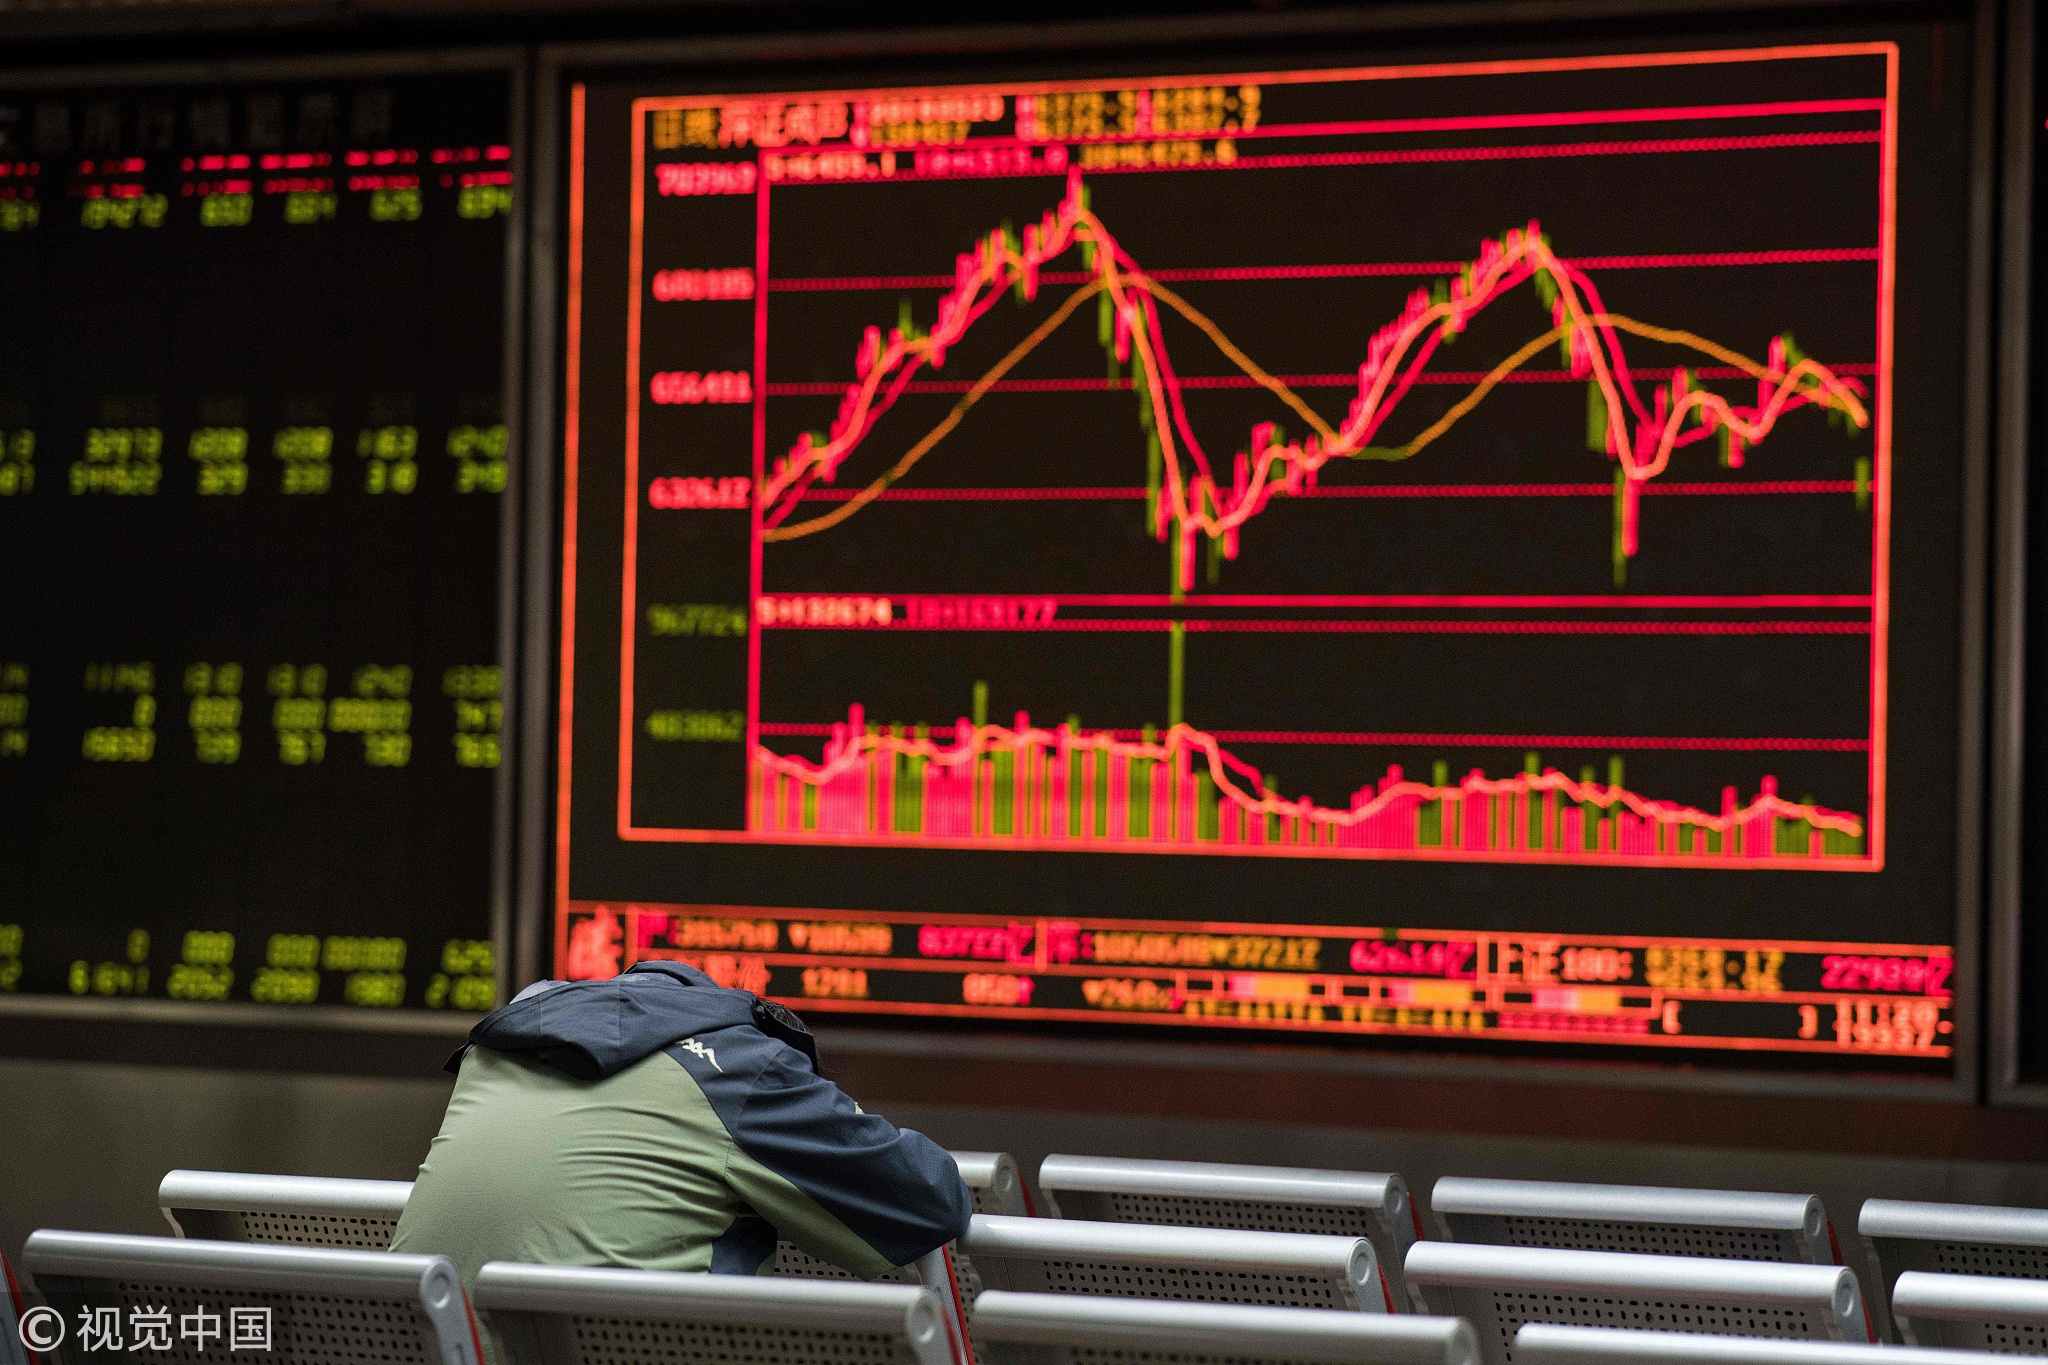 A man rests as he keeps an eye on stock price movements displayed on a screen at a securities company in Beijing on March 23, 2018. [Photo: VCG]